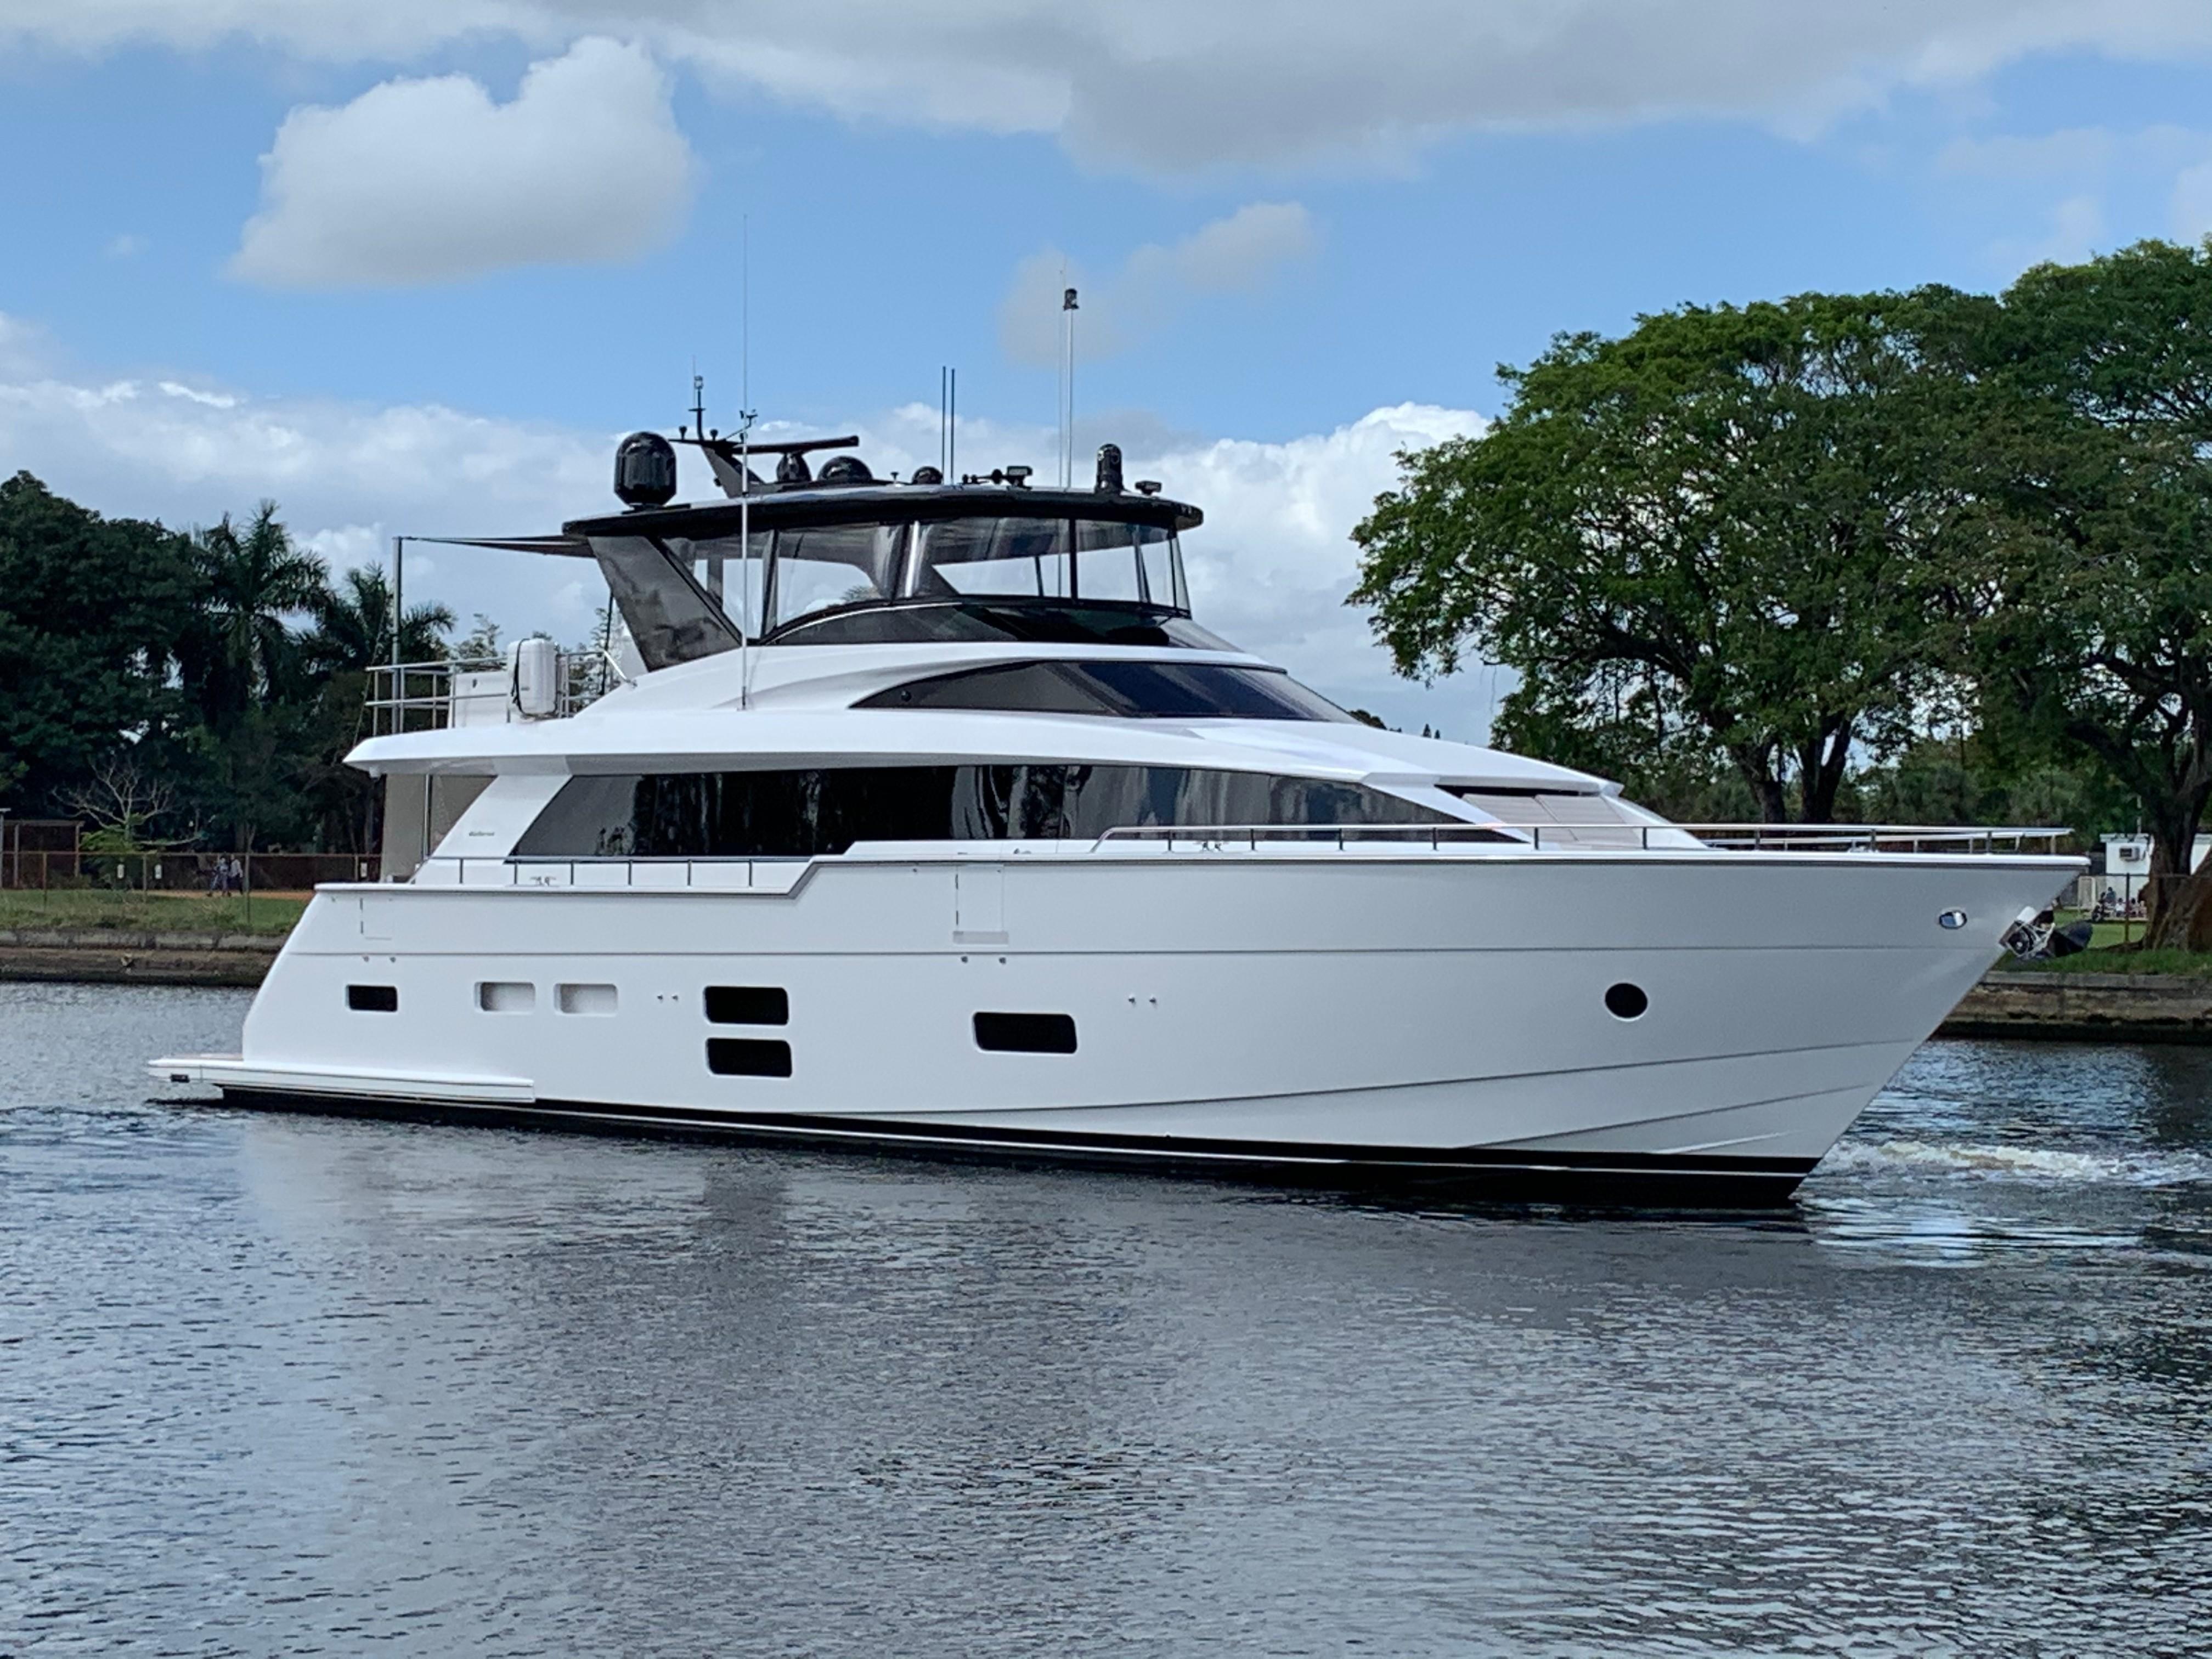 75 ft yacht for sale